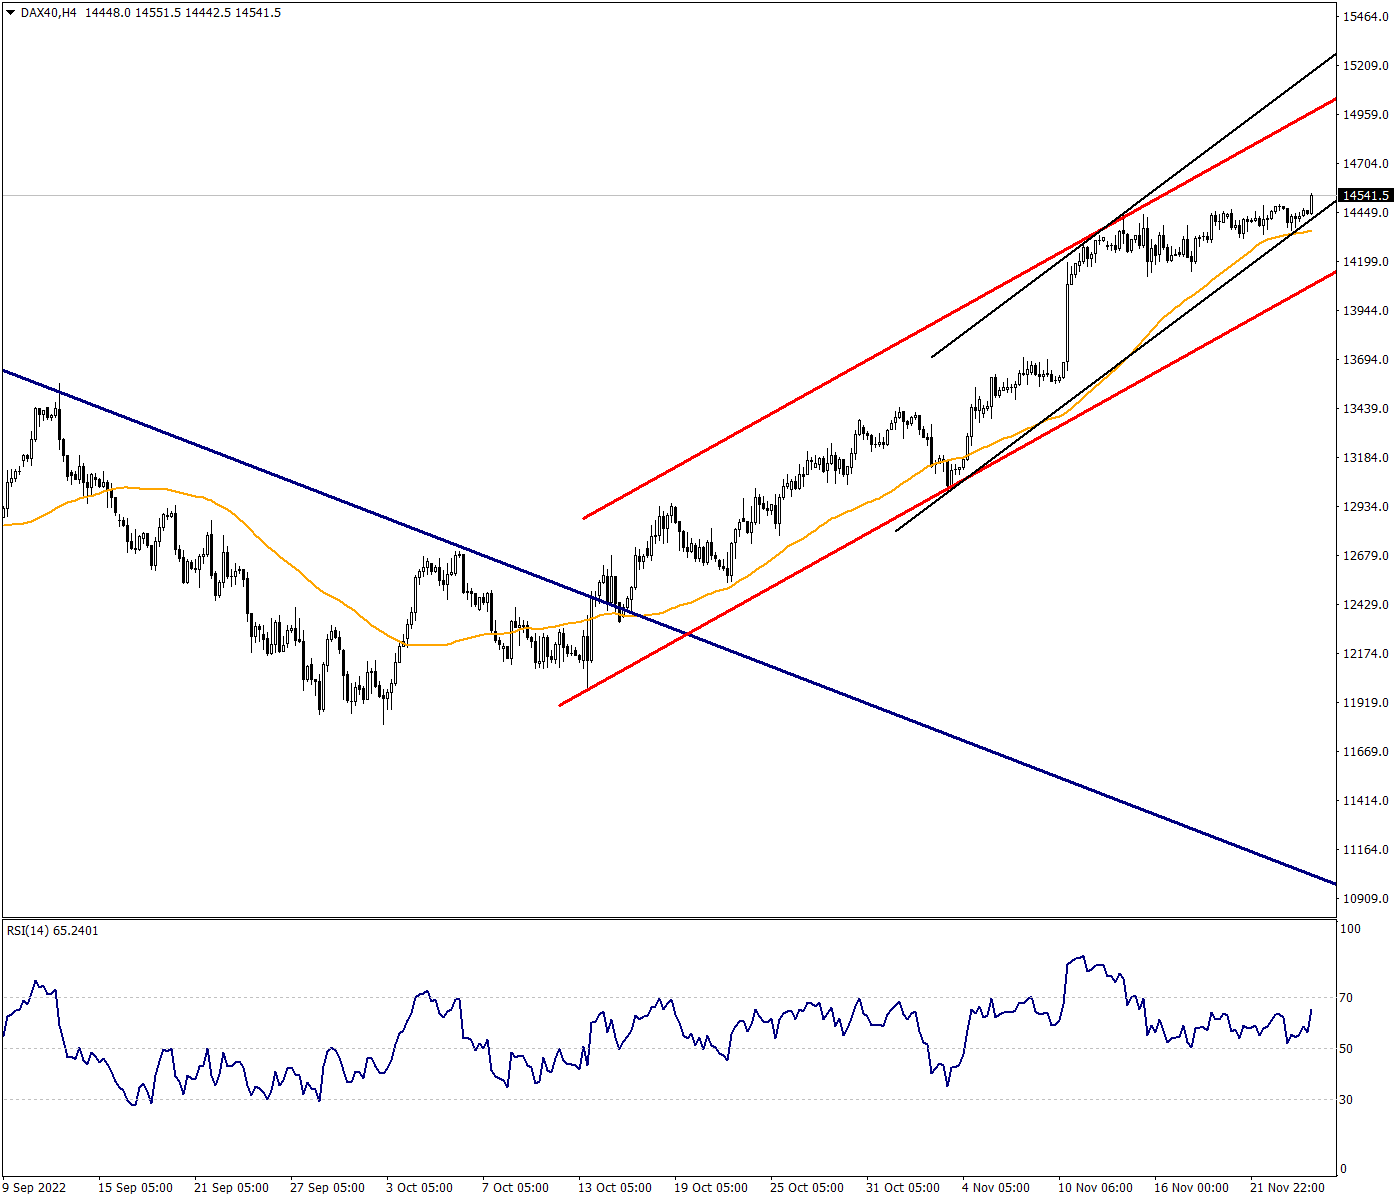 Uptrend Potential Remains in DAX40